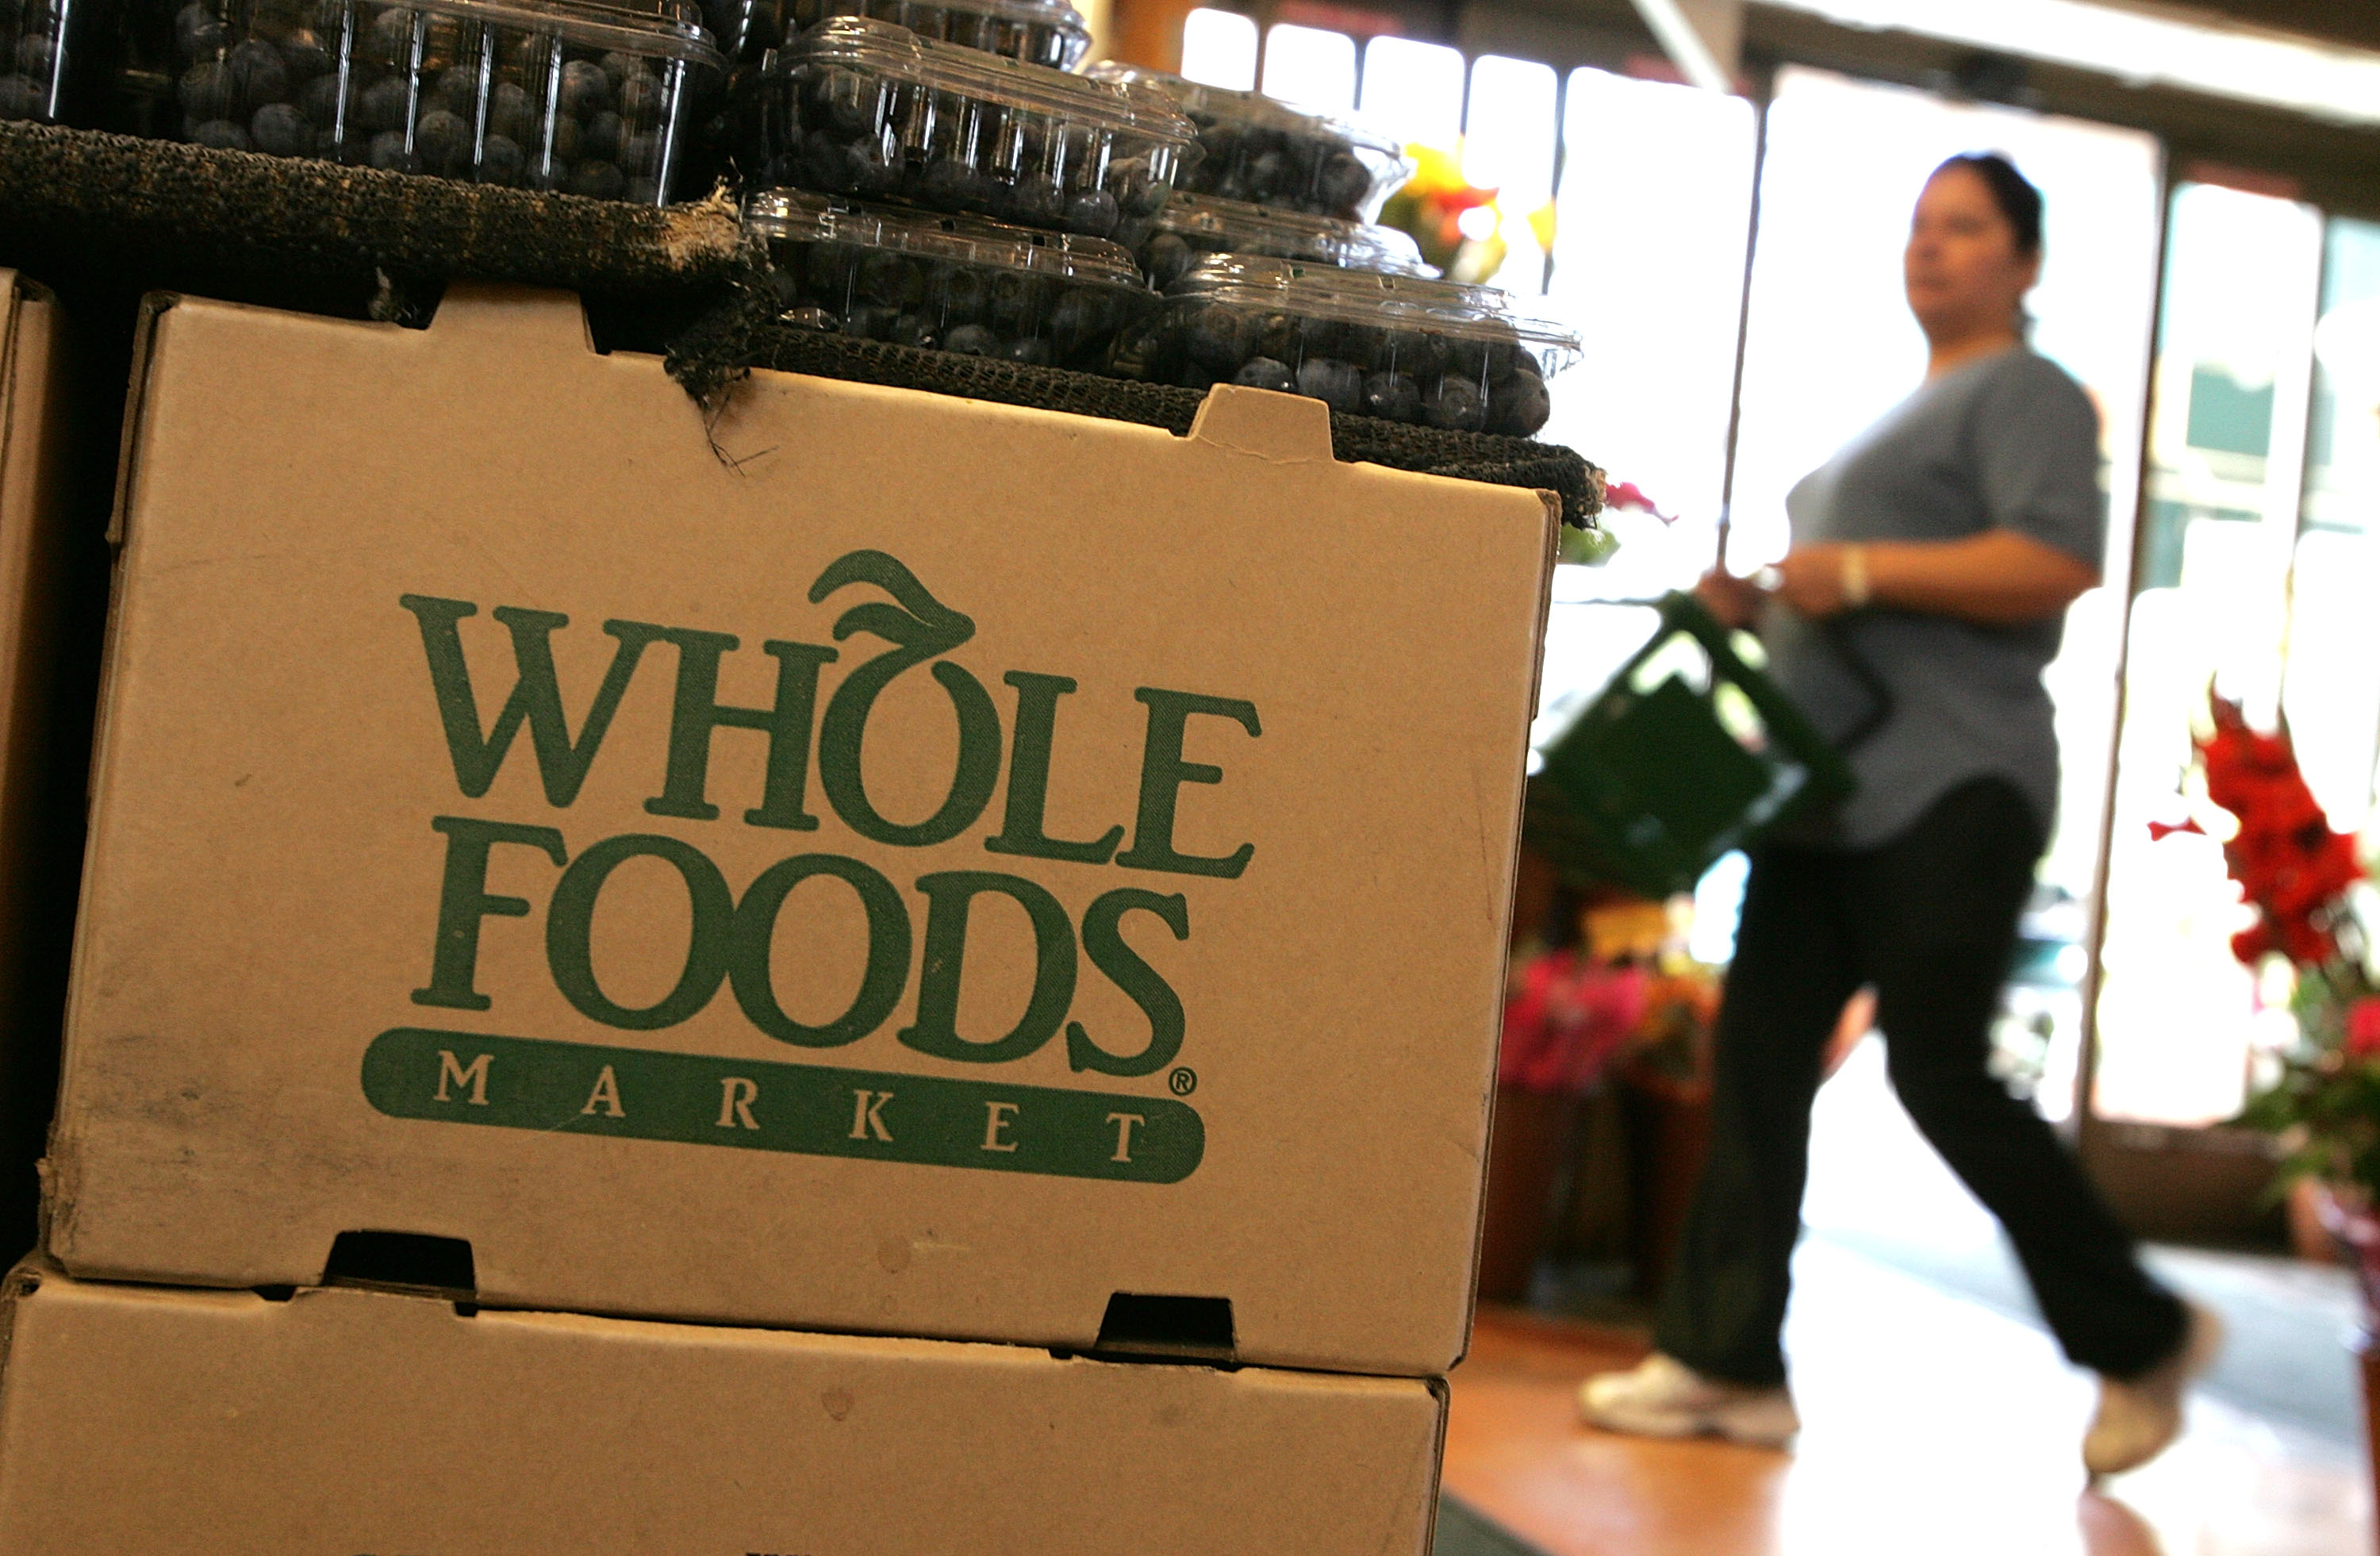 The Whole Foods logo adorns a cardboard box at a Whole Foods Market Feb. 22, 2007 in San Francisco. (Justin Sullivan—Getty Images)